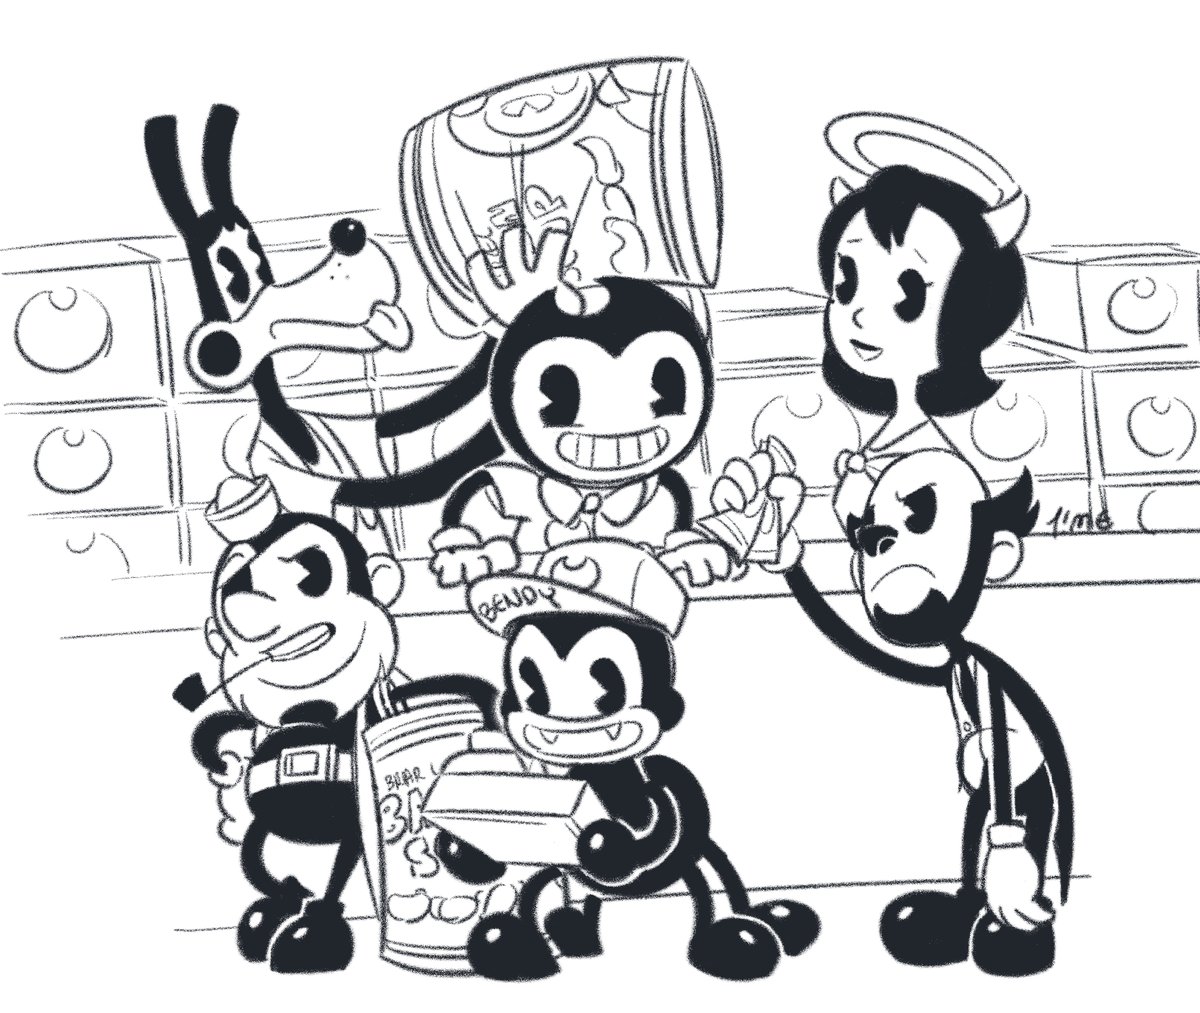 cartoon bendy and the ink machine coloring pages